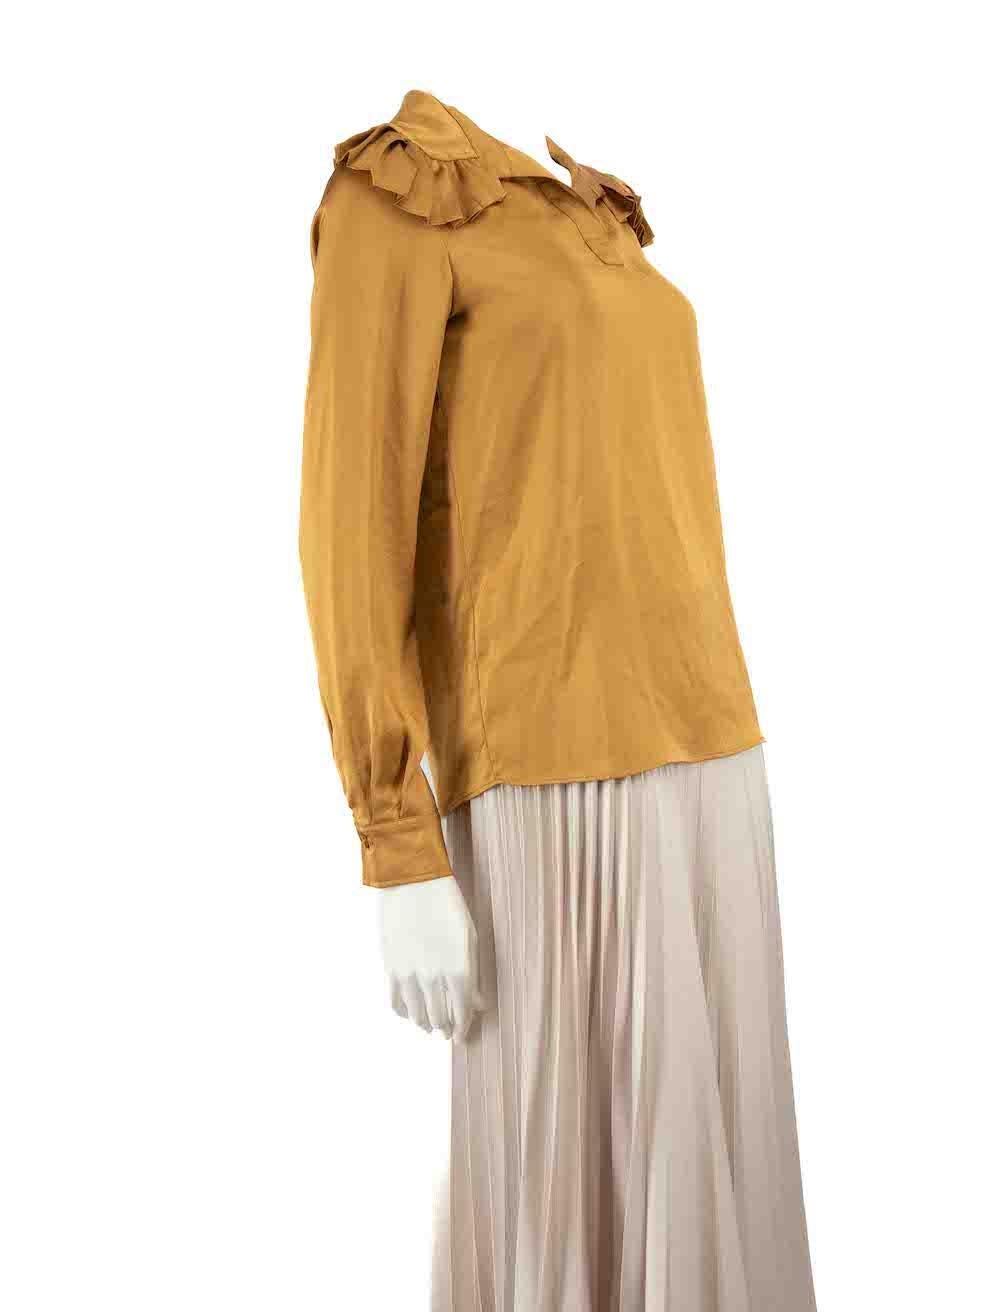 CONDITION is Very good. Minimal wear to blouse is evident. Minimal discolouration mark to rear left side on this used See By Chloé designer resale item.
 
 Details
 Brown
 Polyester
 Blouse
 Long sleeves
 Pleated collar detail
 V-neck
 Buttoned